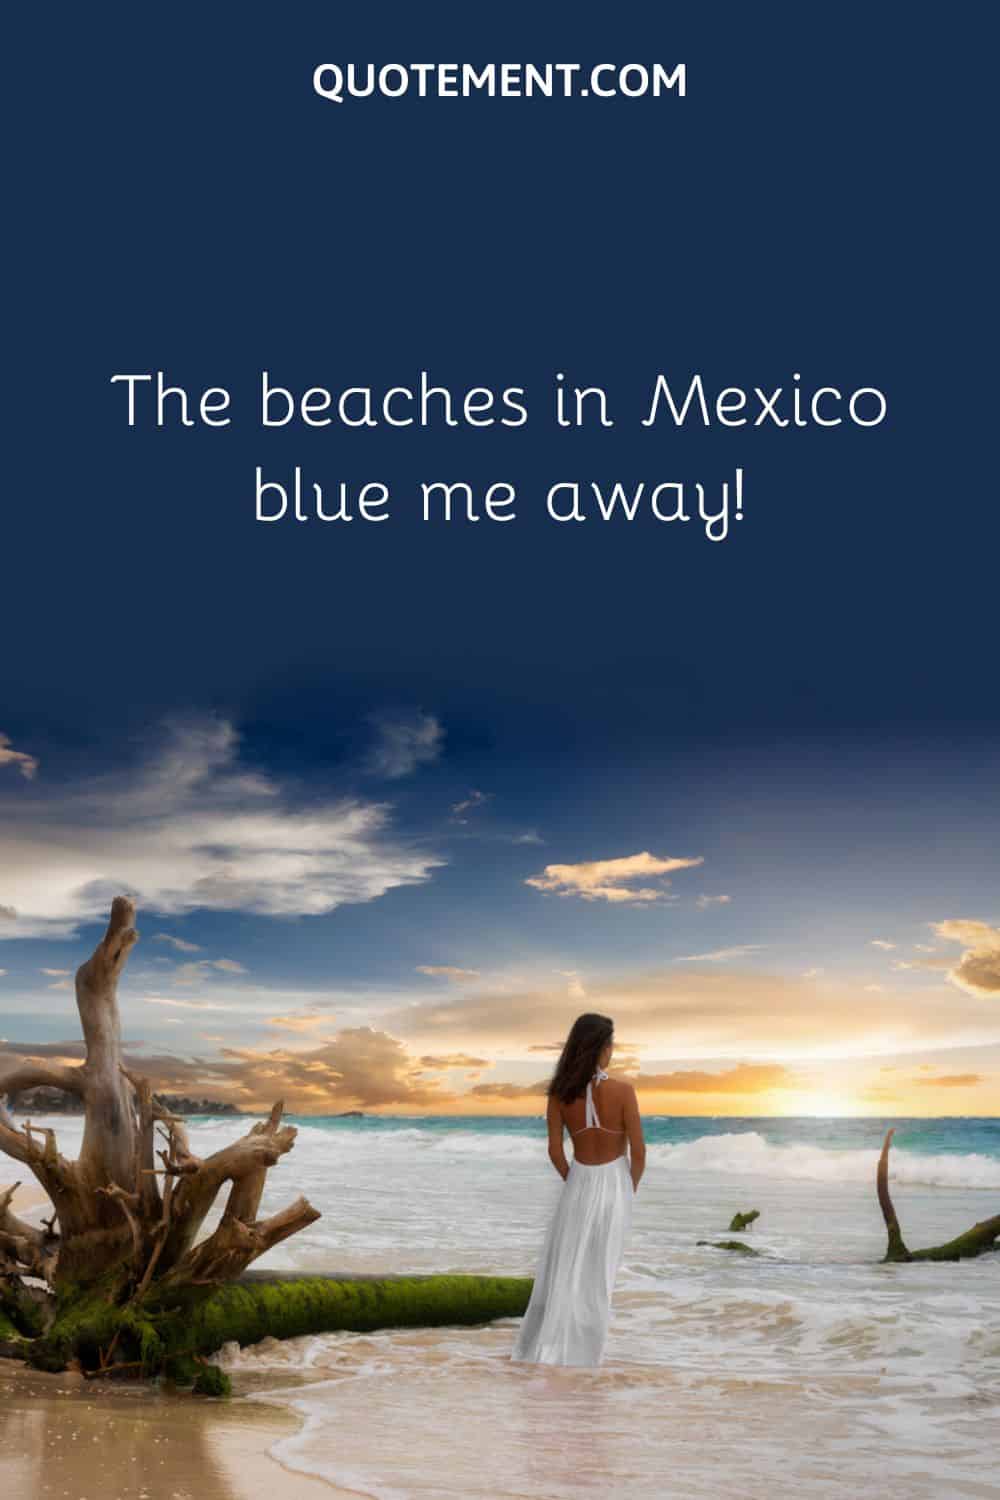  The beaches in Mexico blue me away